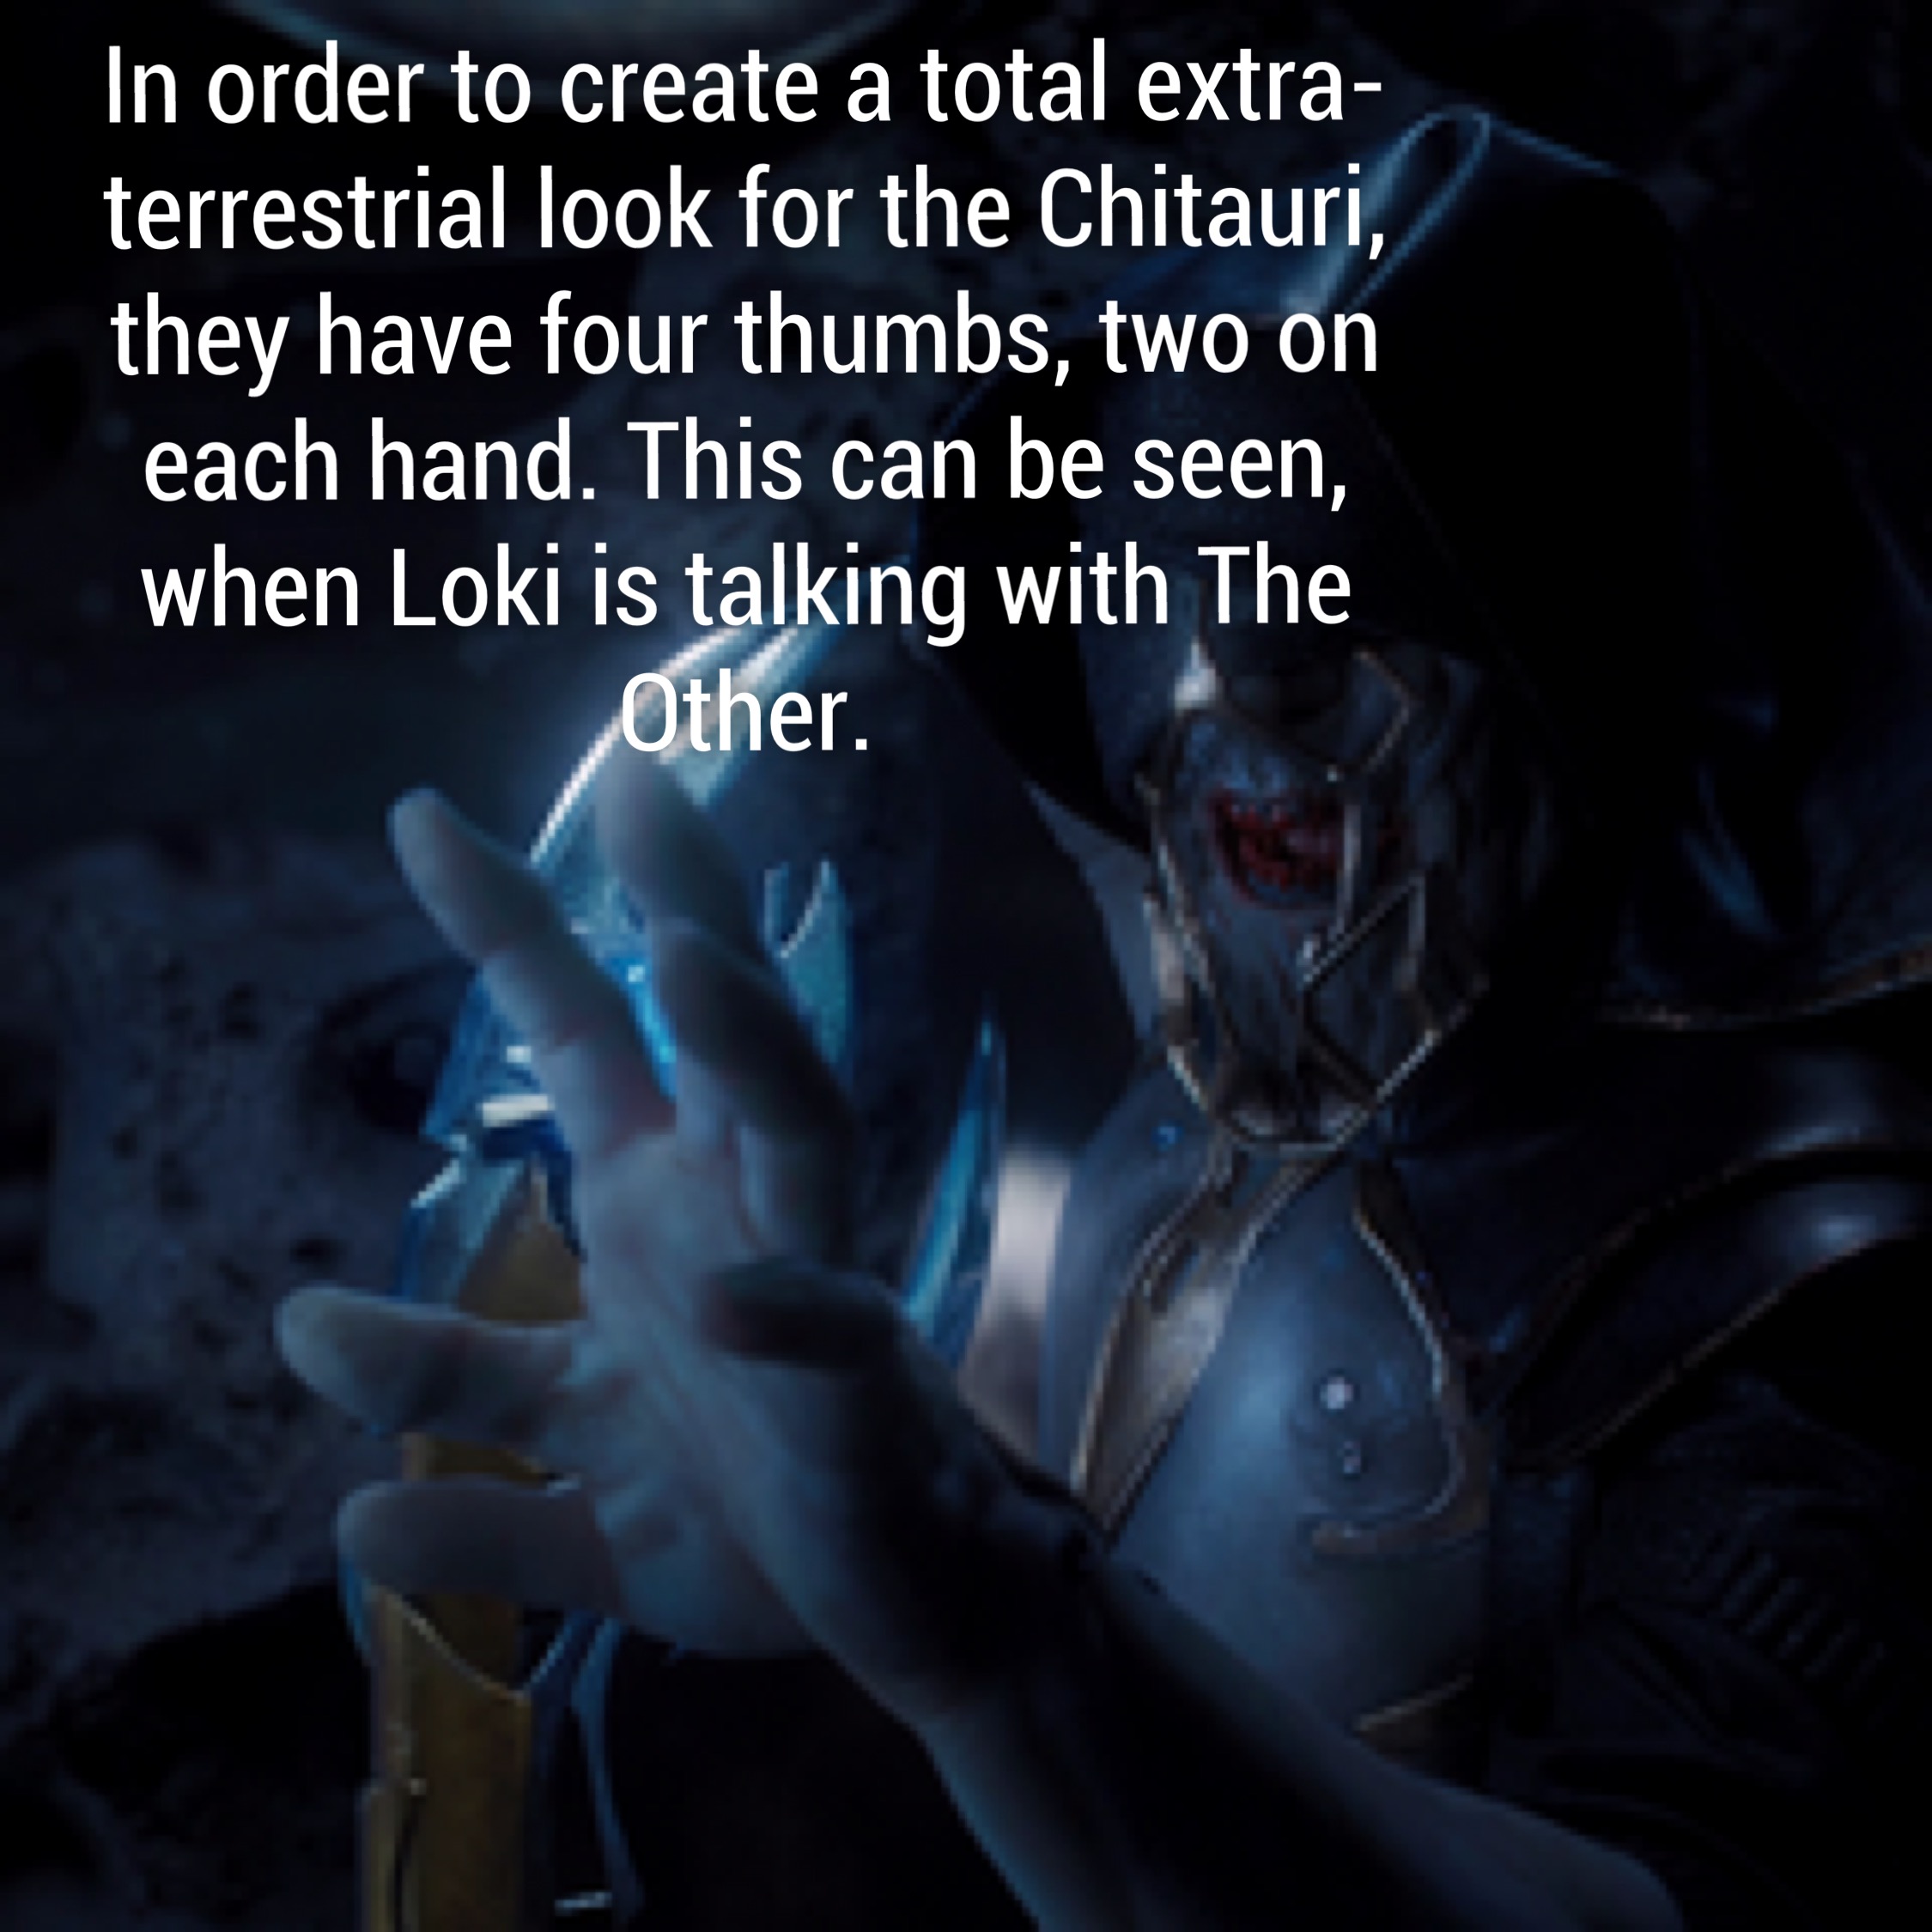 other guardians - In order to create a total extra terrestrial look for the Chitauri, they have four thumbs, two on each hand. This can be seen, when Loki is talking with The Other.